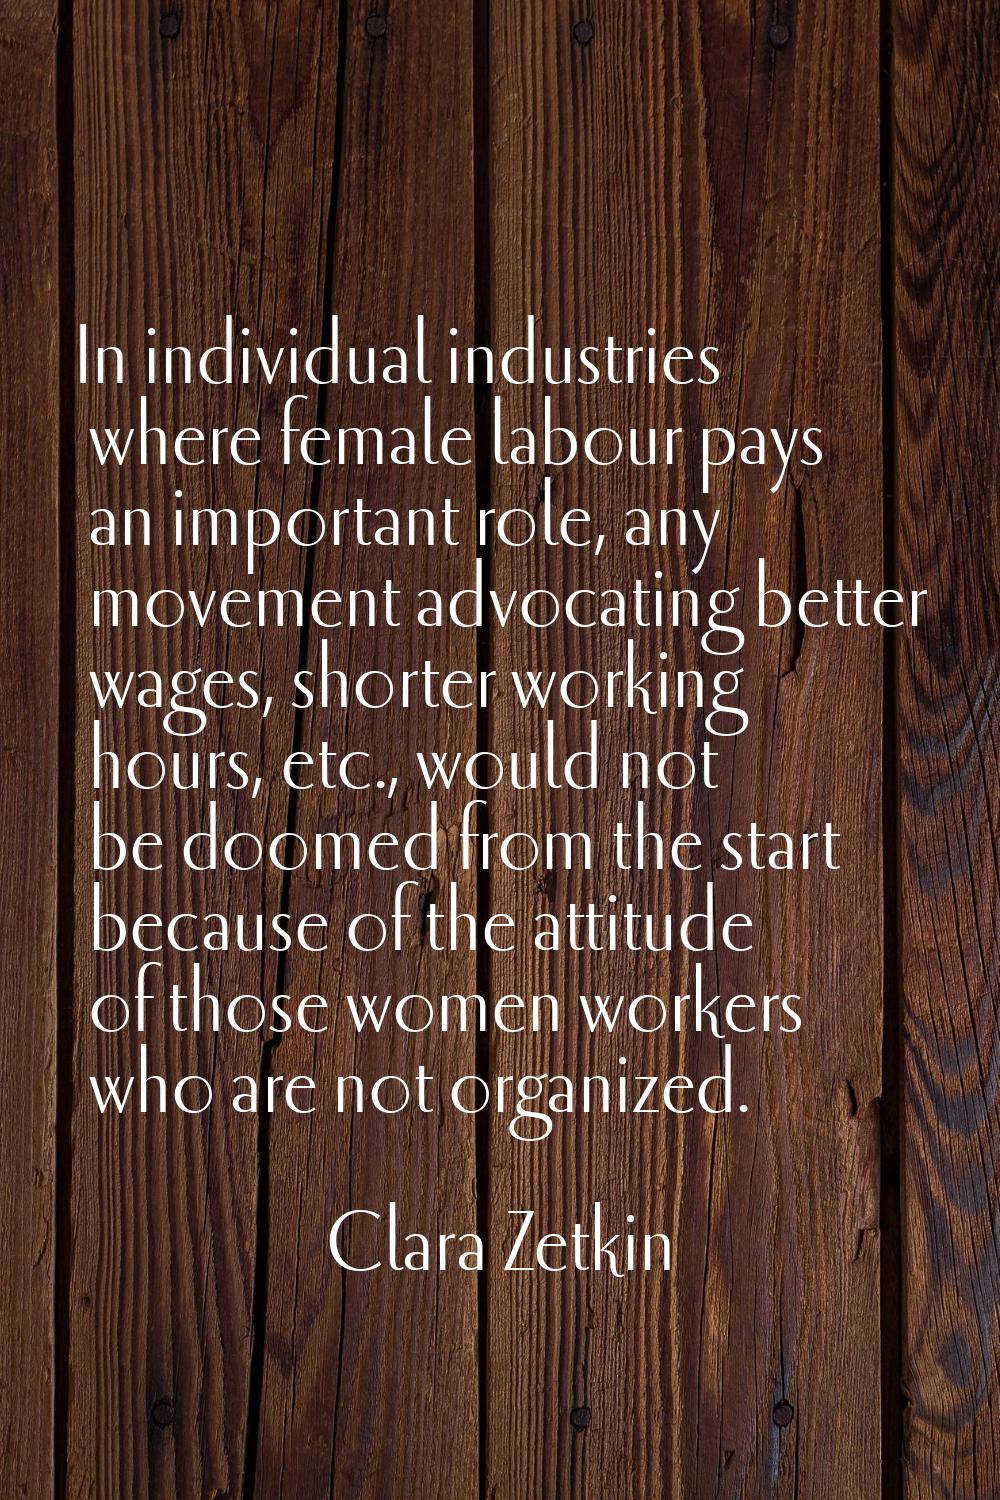 In individual industries where female labour pays an important role, any movement advocating better